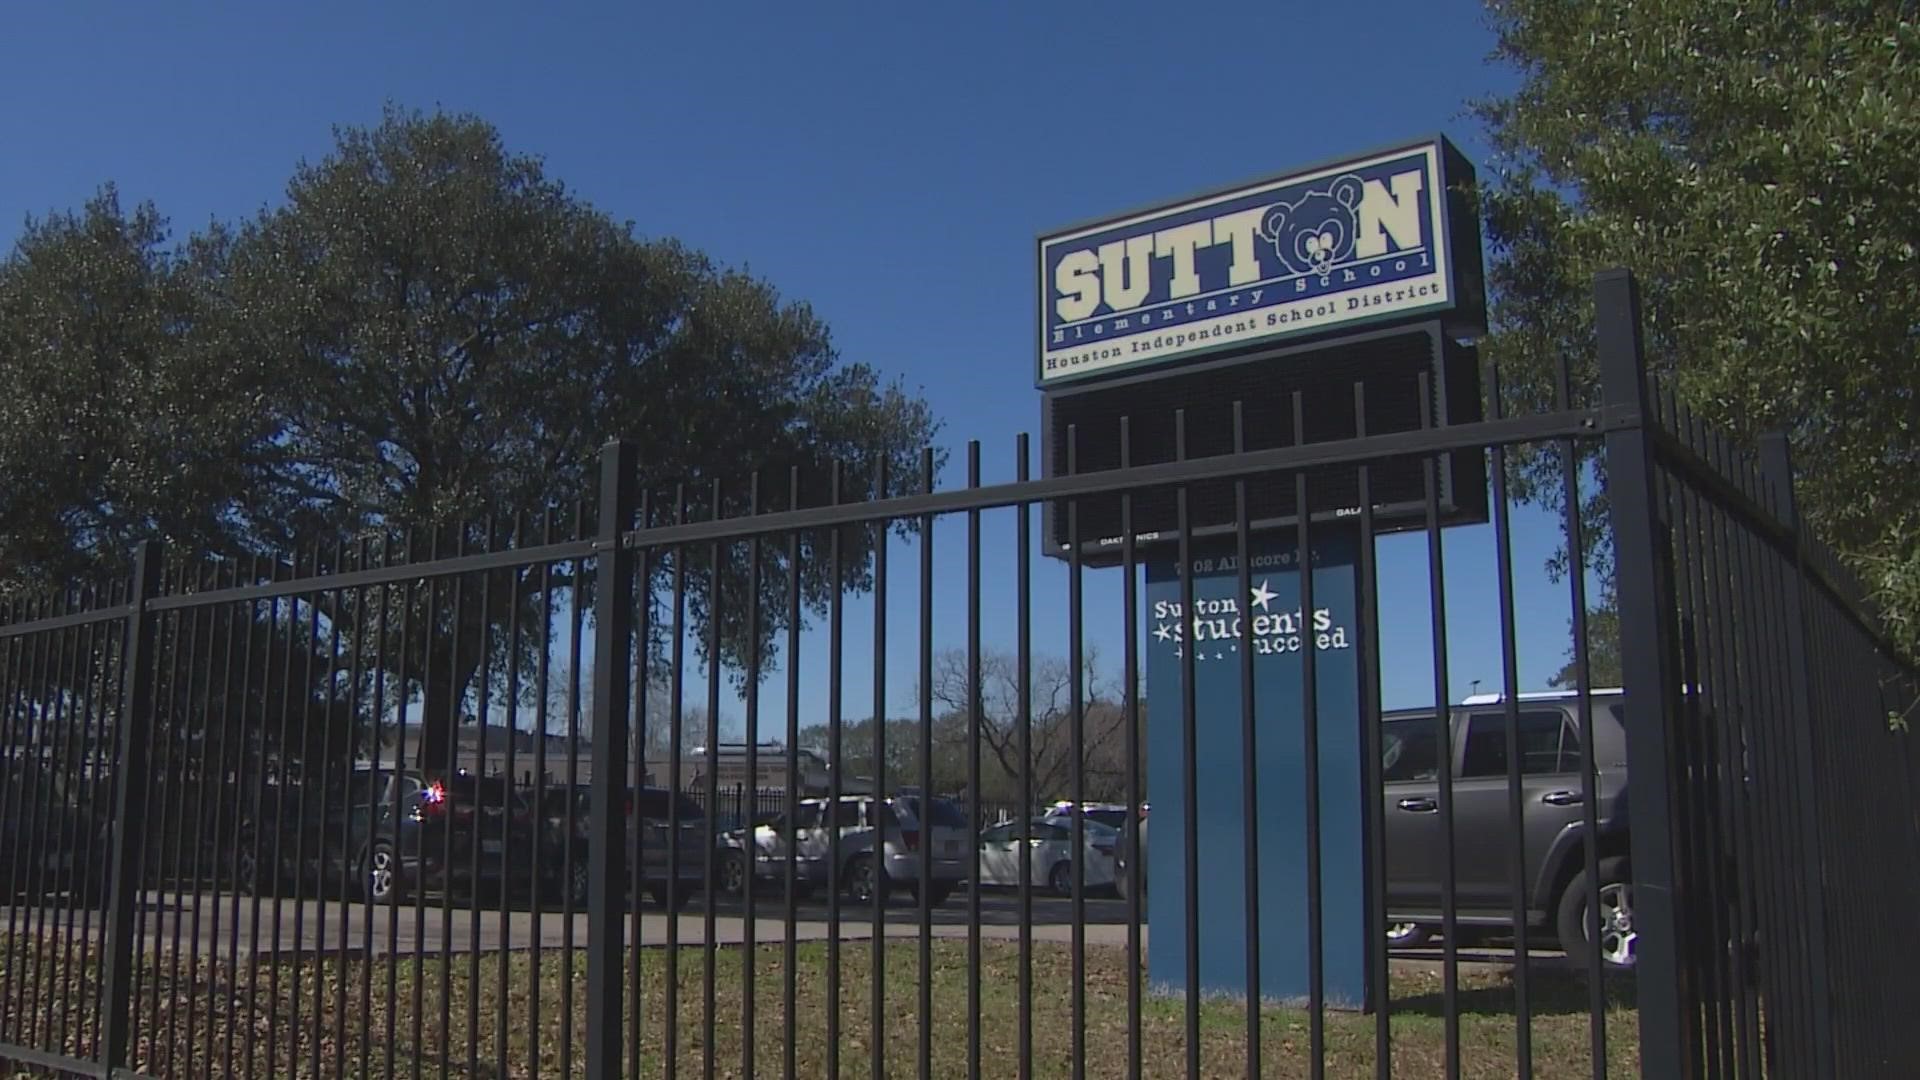 Parents say they were made aware of the allegations at a meeting at the school this week.